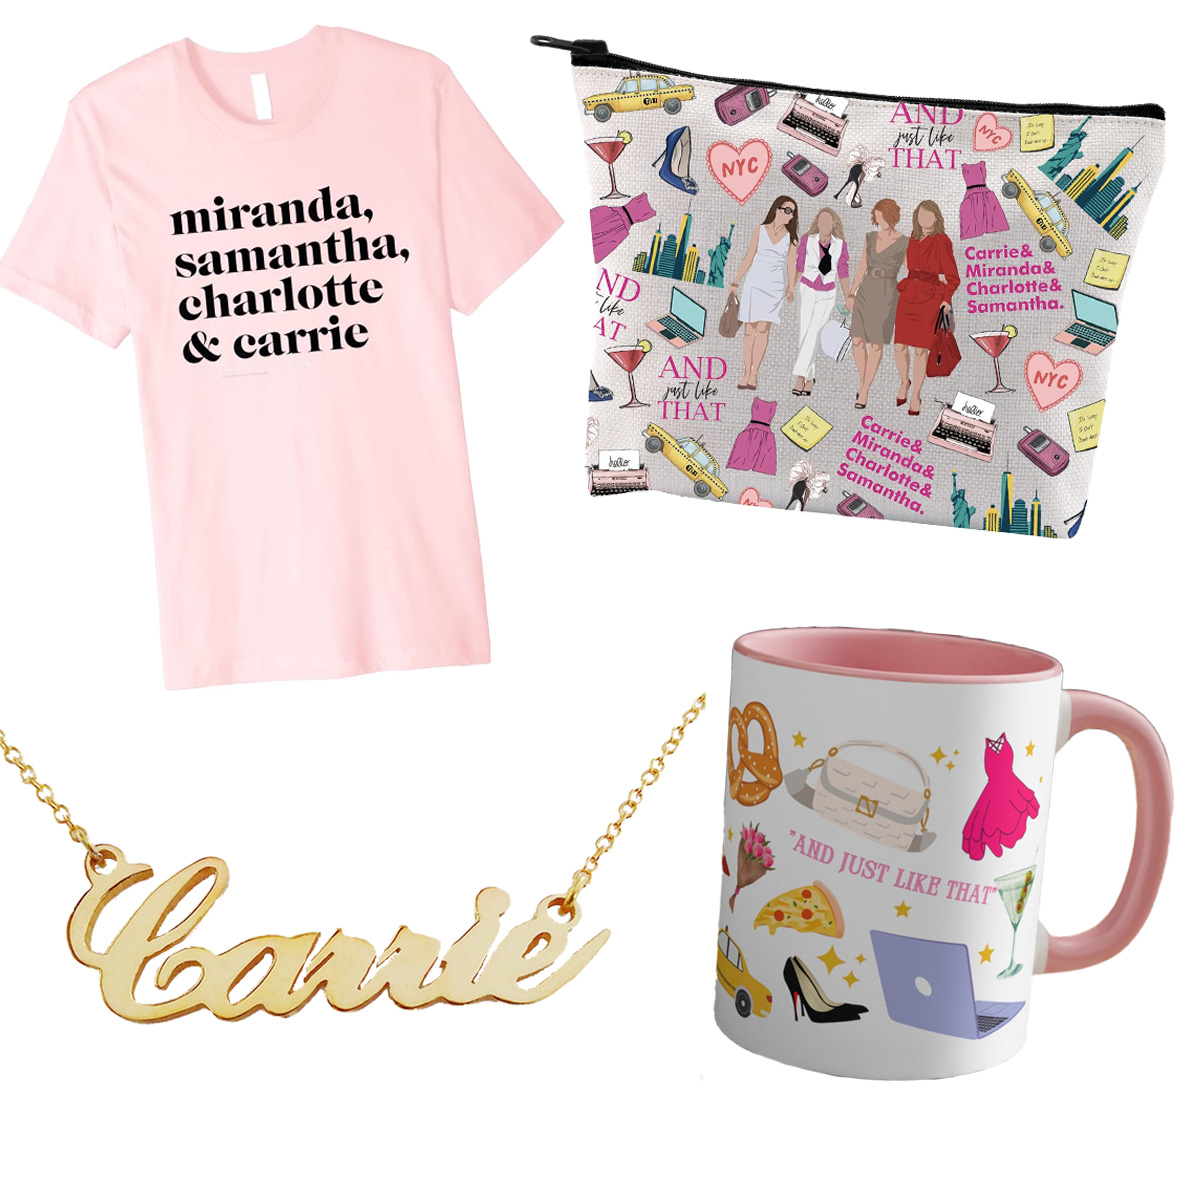 Cheers Your Cosmos to Our Fabulous Sex and the City Gift Guide